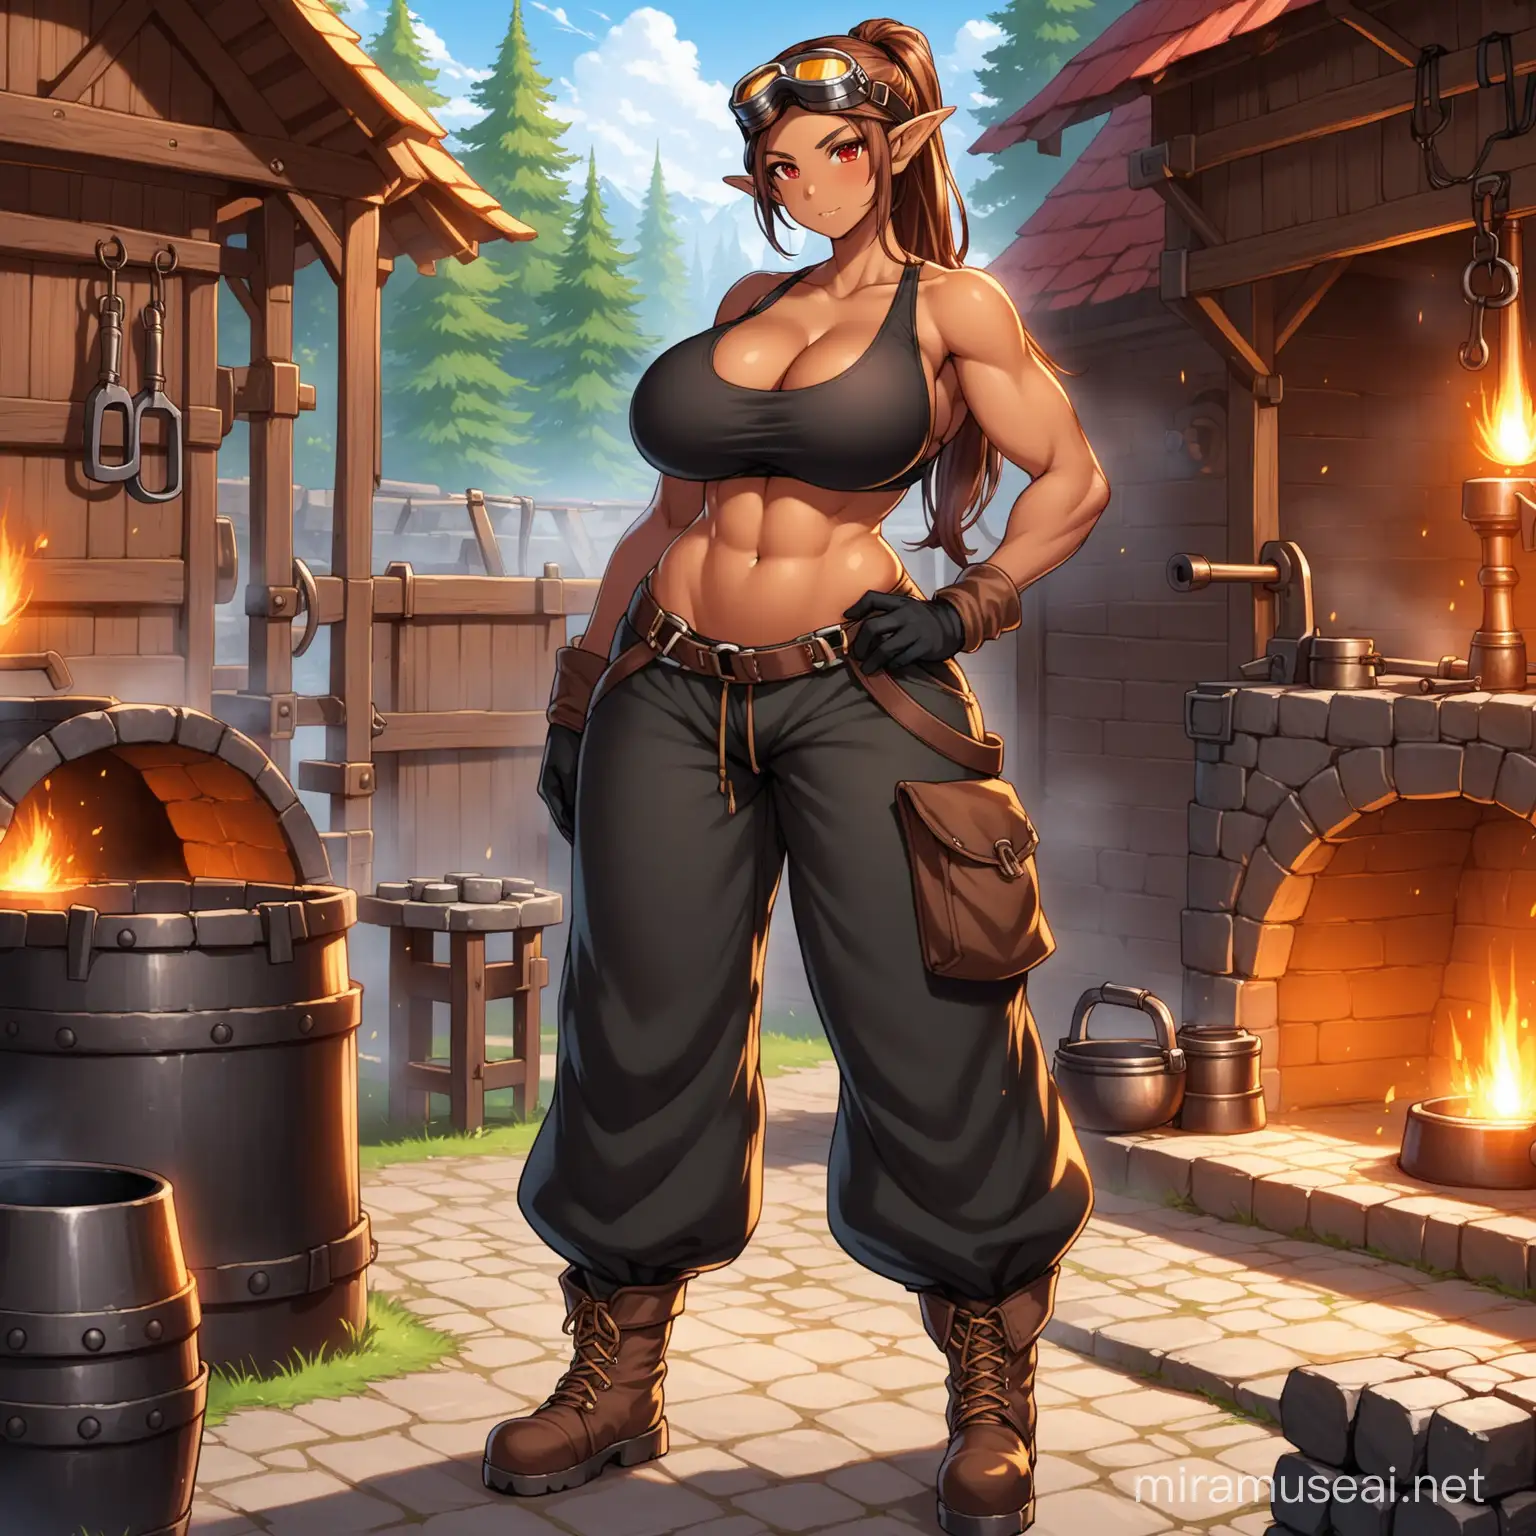 Elven Female Blacksmith Crafting in Forge with Exposed Stomach